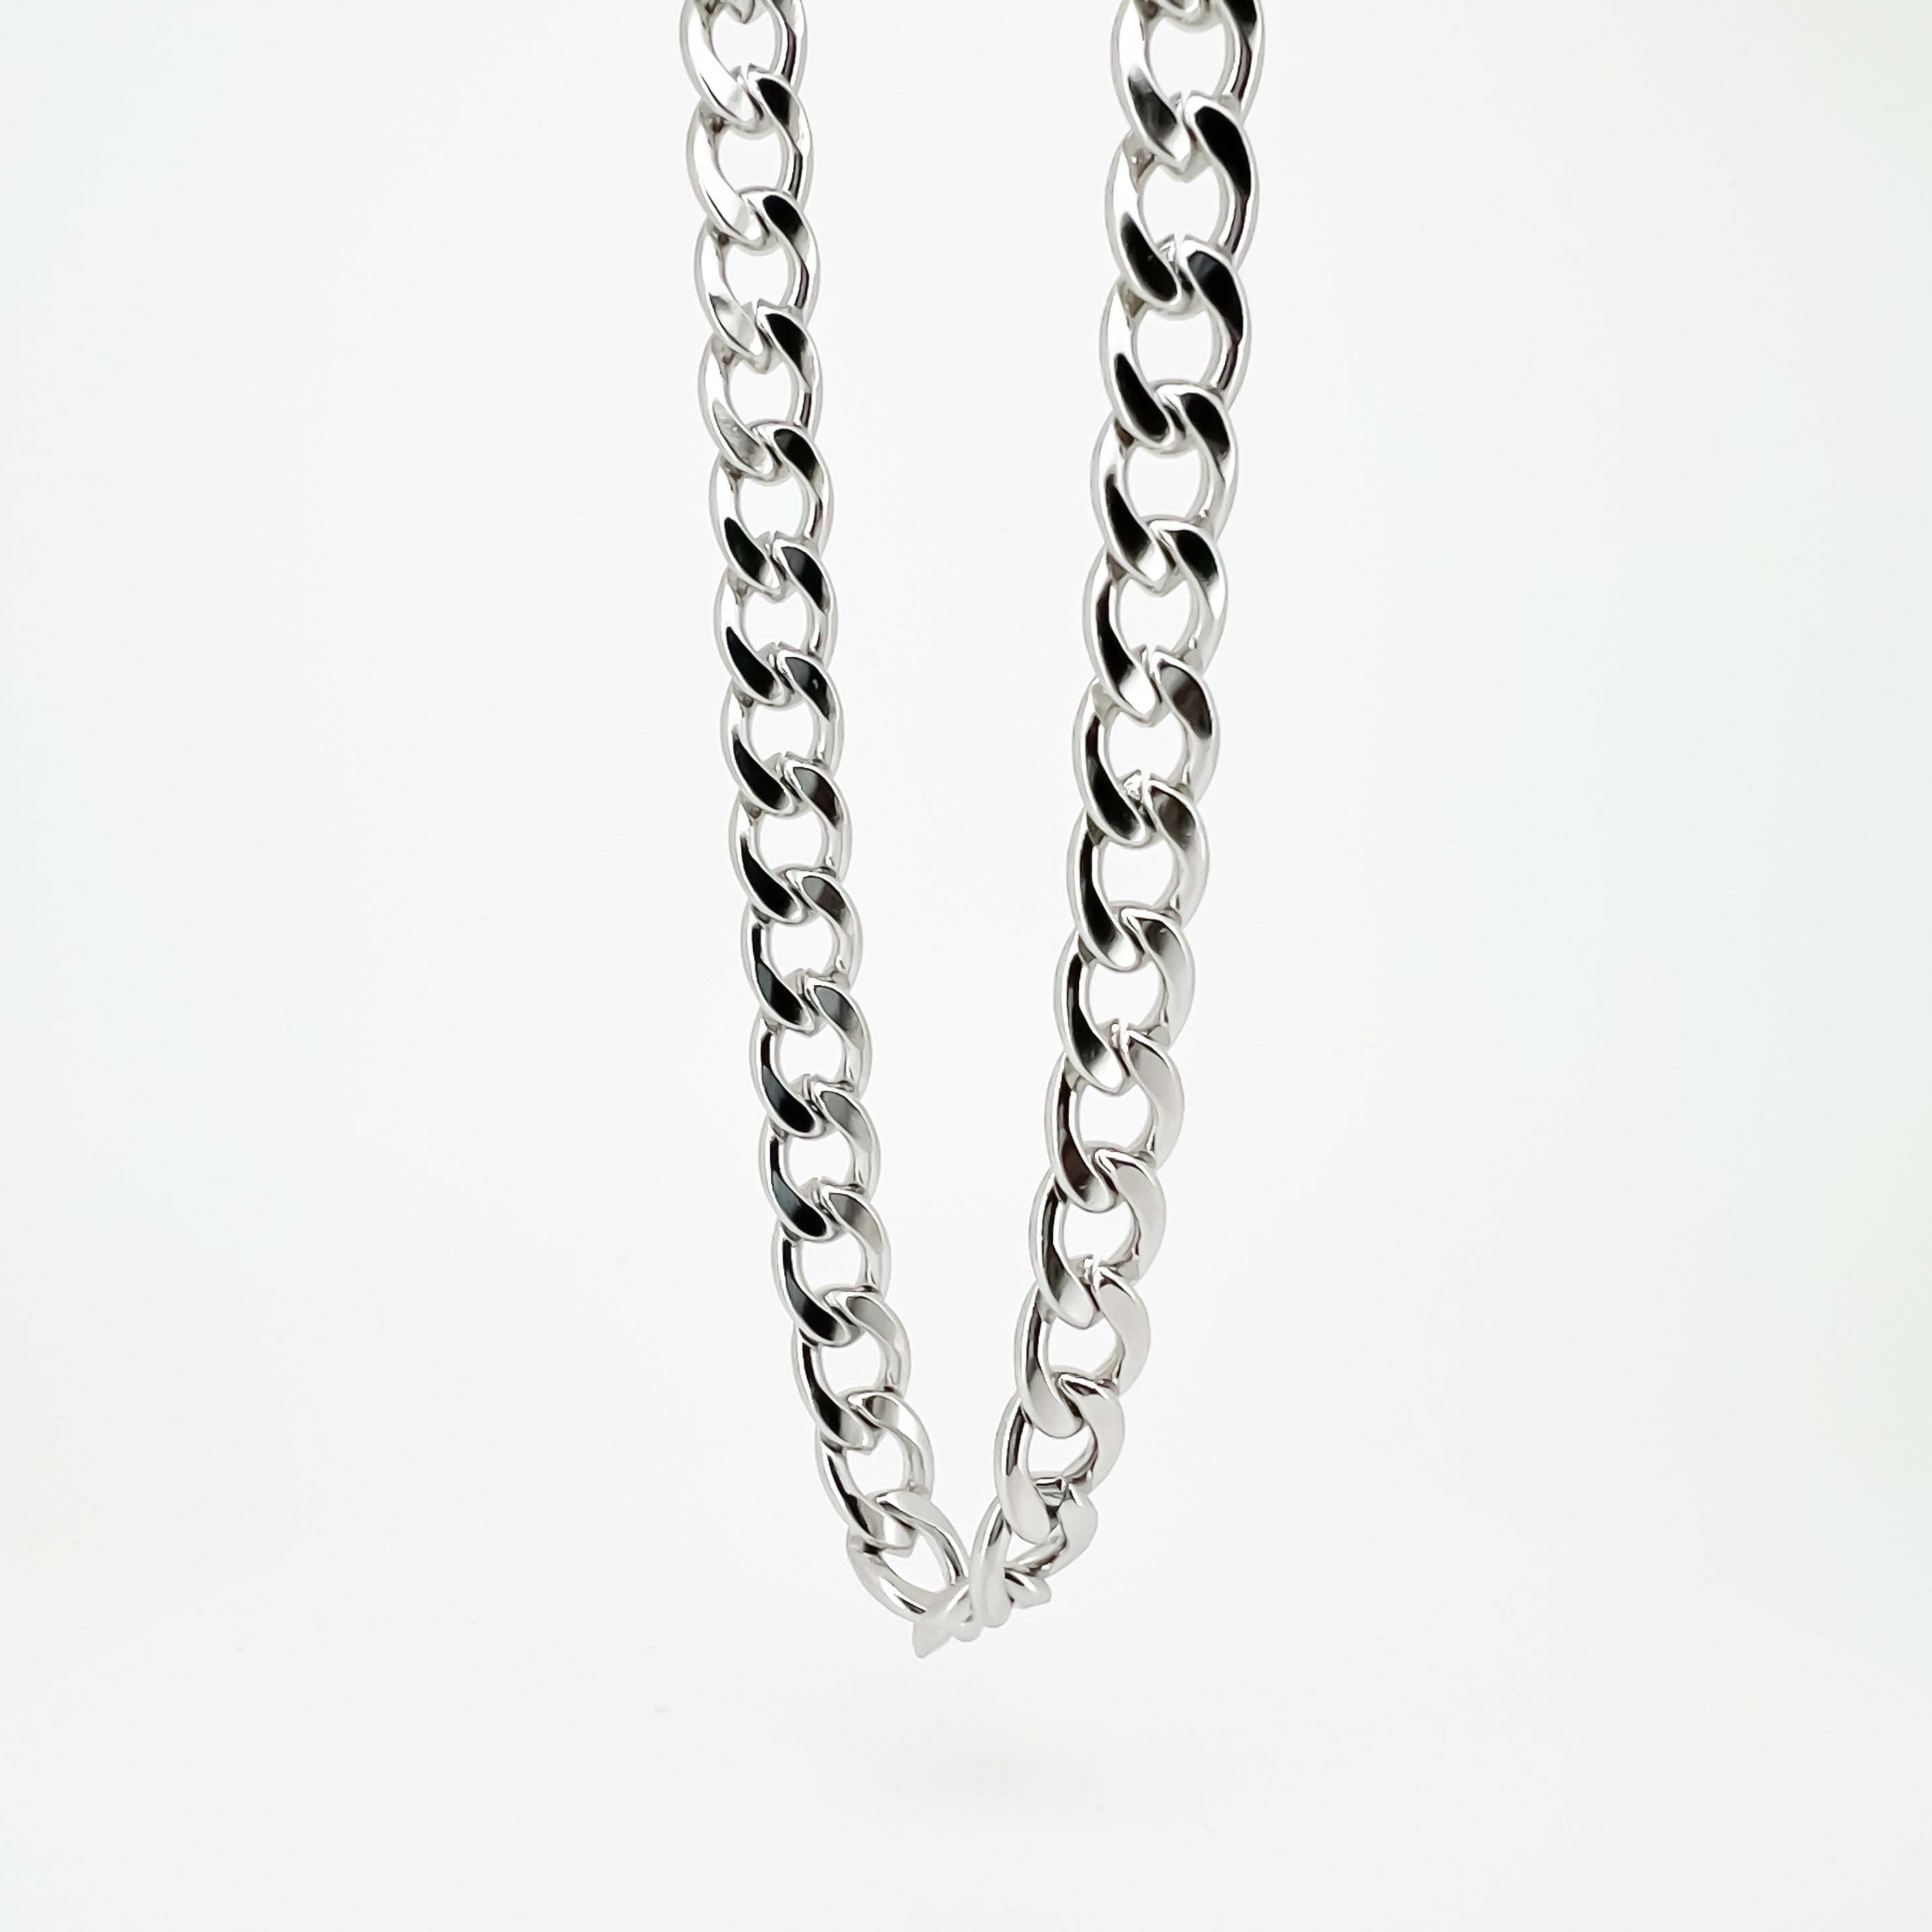 Flemyng Stainless Steel Curb Chain Necklace